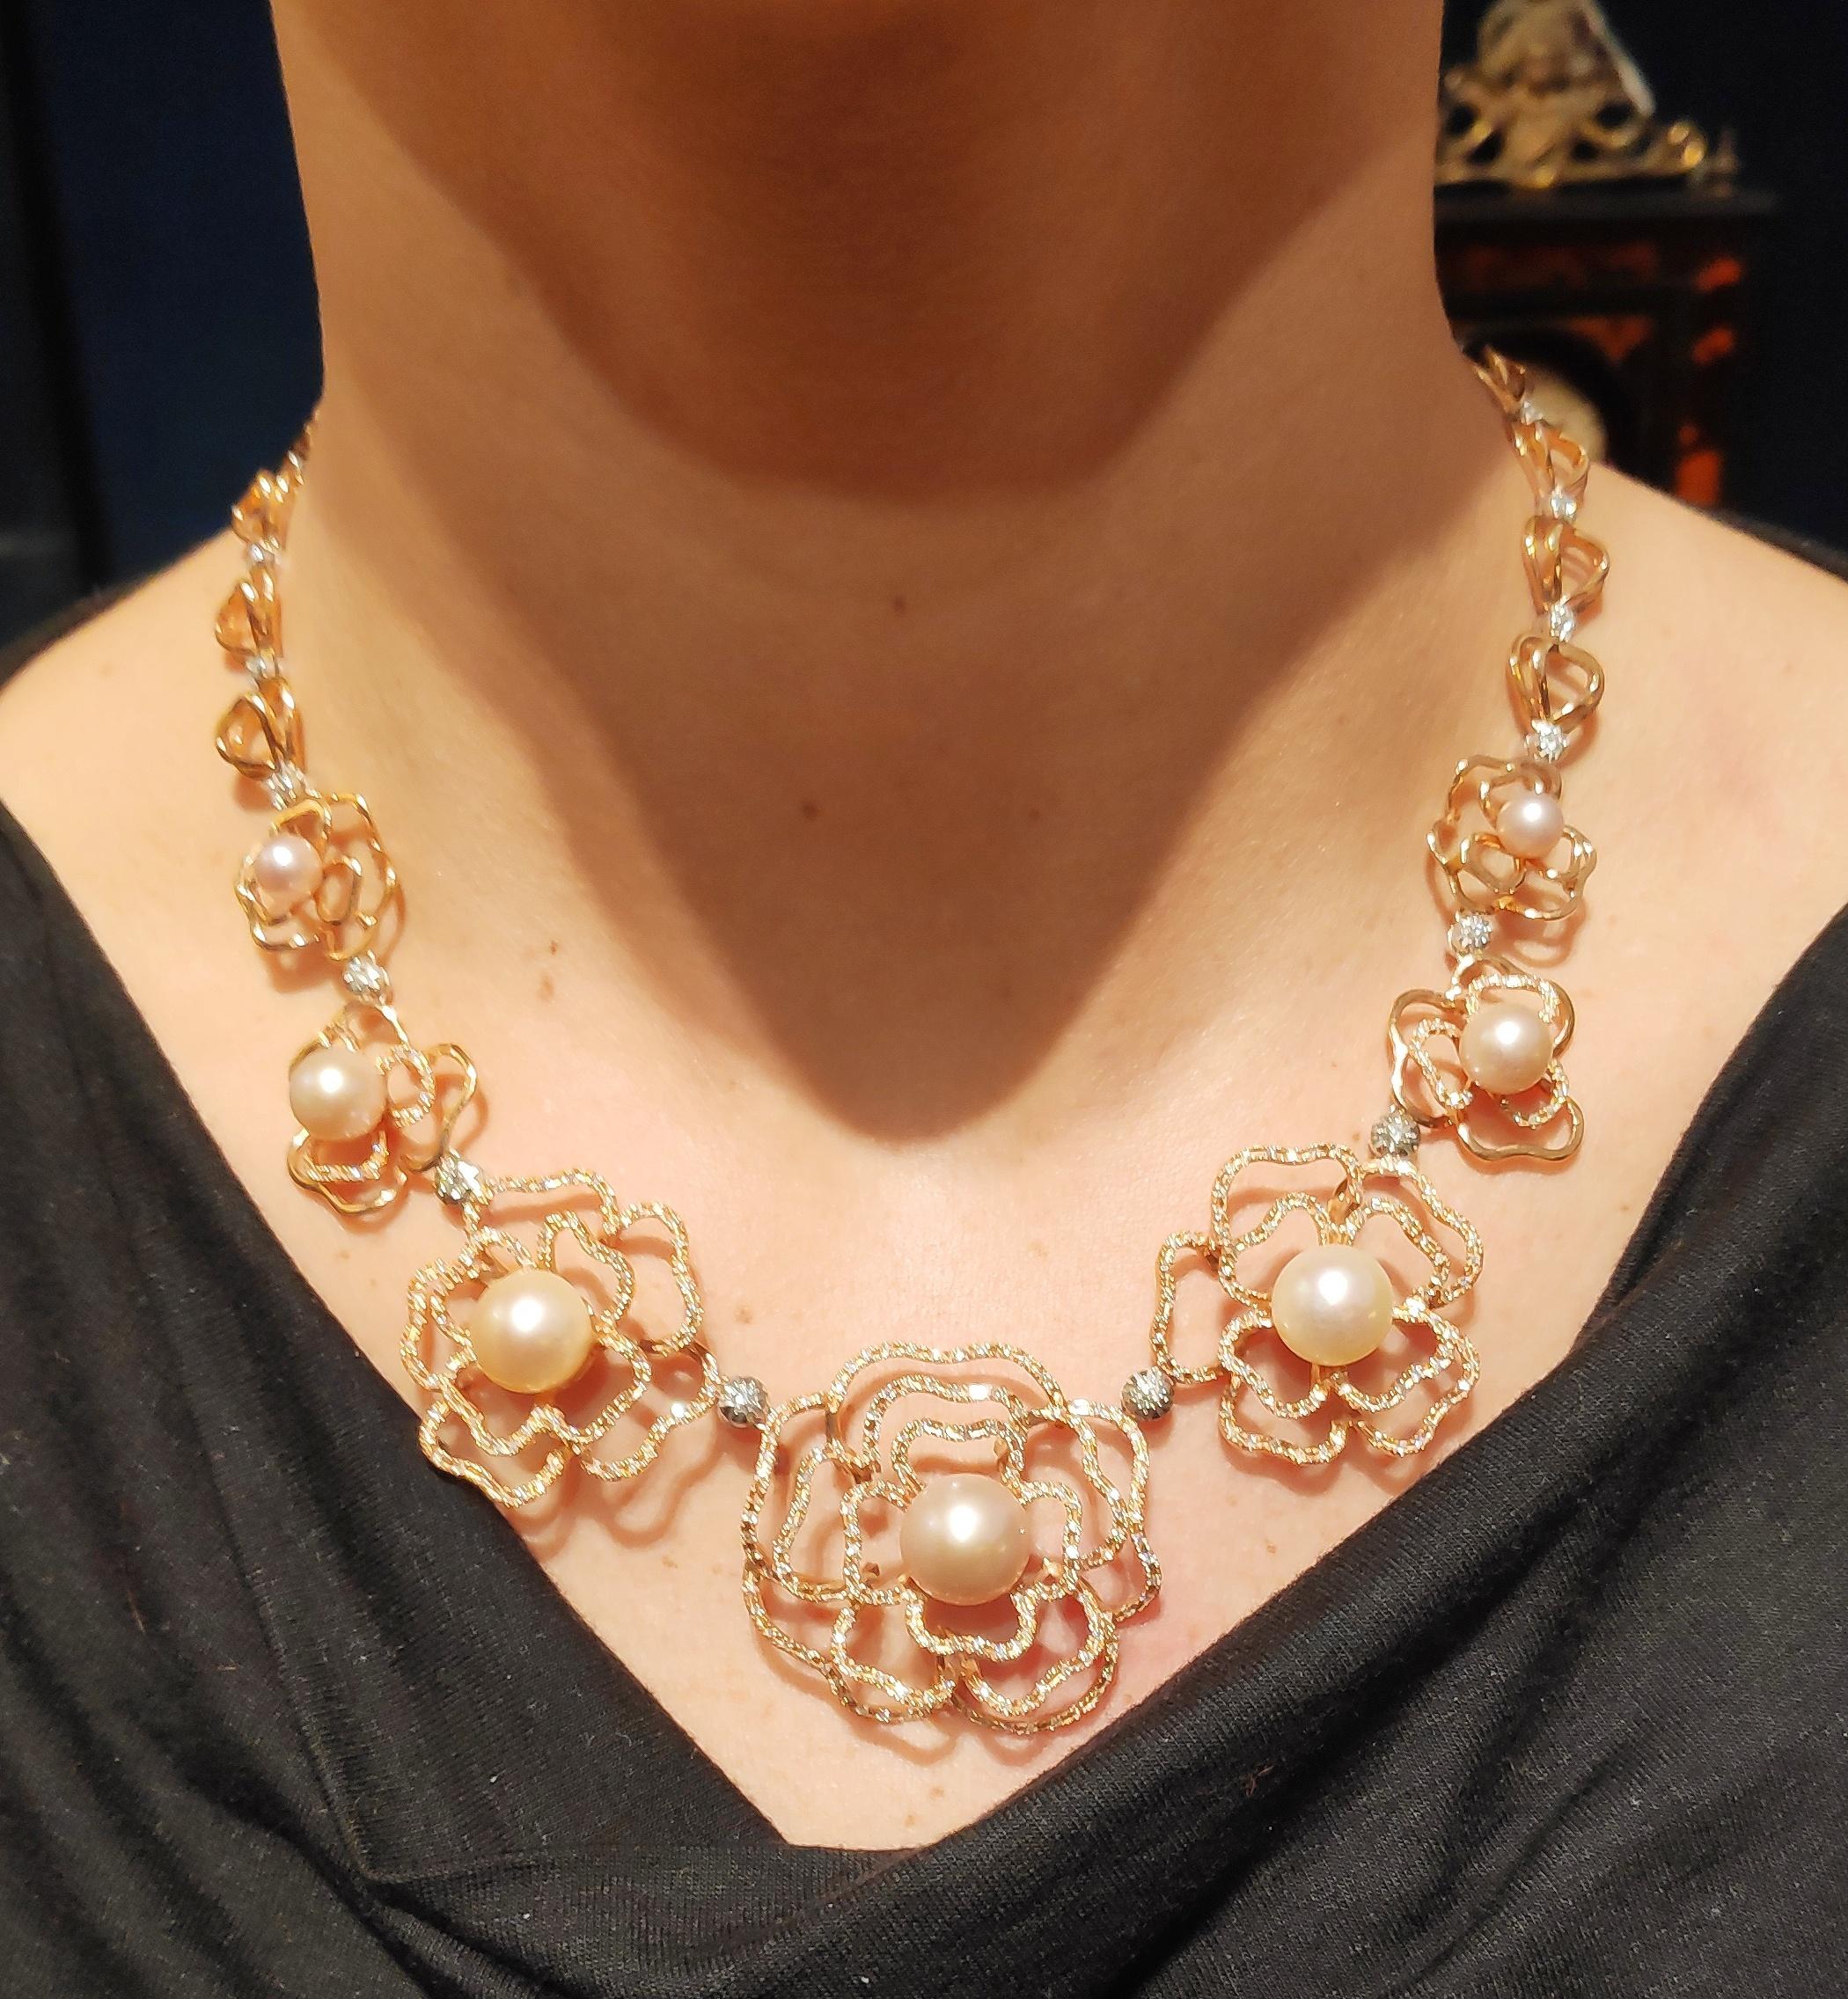 Link Necklace  withe and yellow gold 18kt with 7 flowers ,5 full of diamonds and central pearl and 2 flowers with pearls .the chain continue on the back total diamonds ct 2,70.
Australians pink pearls 44 ct , gold  weight 63gr
Italian manufacture